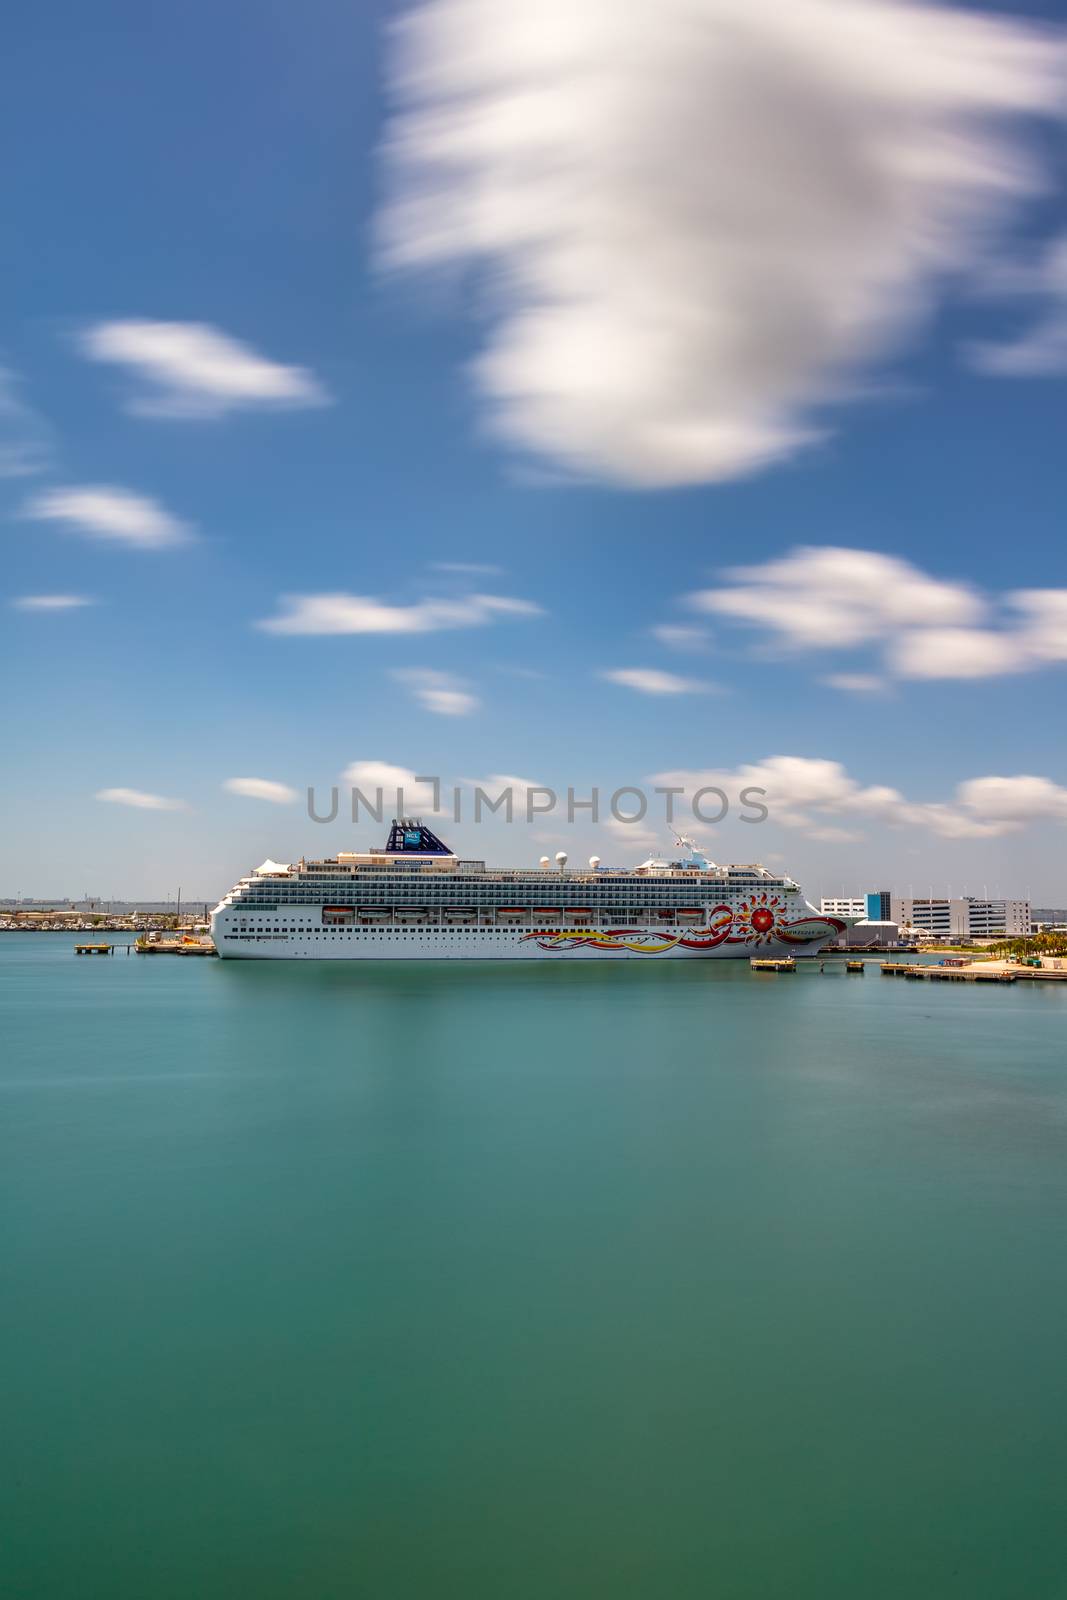 Port Canaveral, Florida, US - June 21, 2019: Norwegian Sun cruise ship docked in Port Canaveral, FL, US